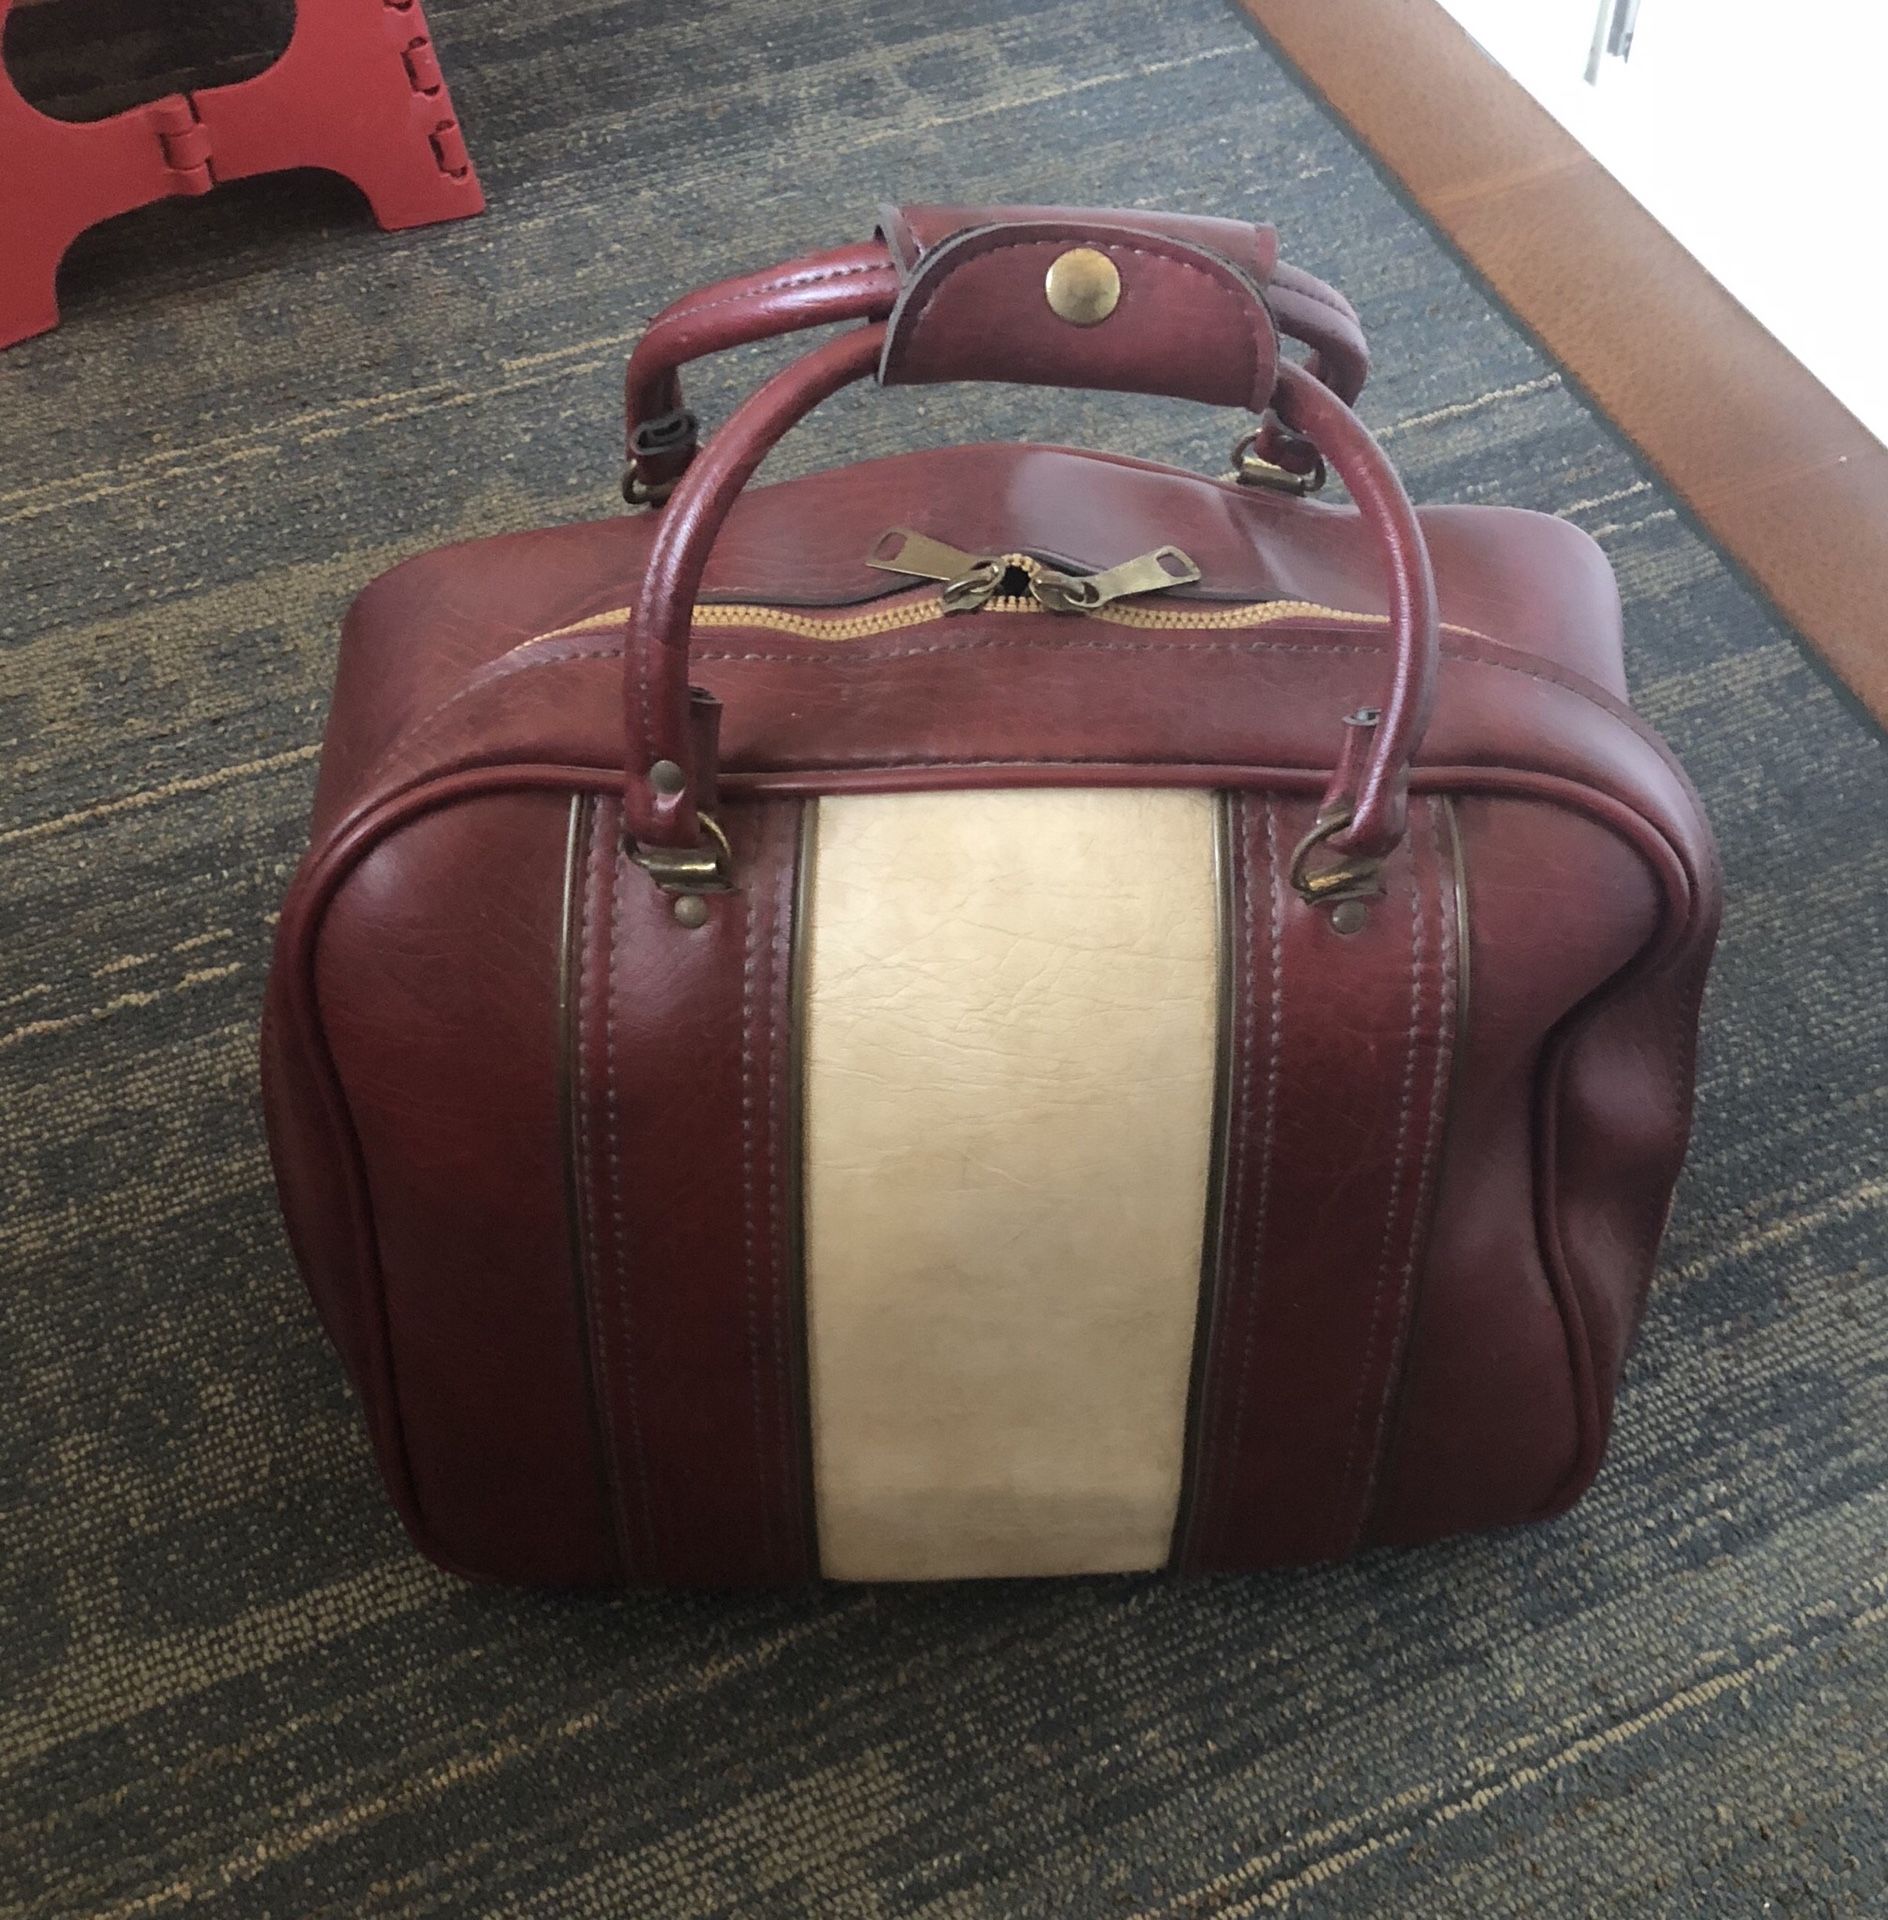 Cool Vintage Bowling Ball Bag Repurpose As Purse for Sale in Charlestown,  RI - OfferUp